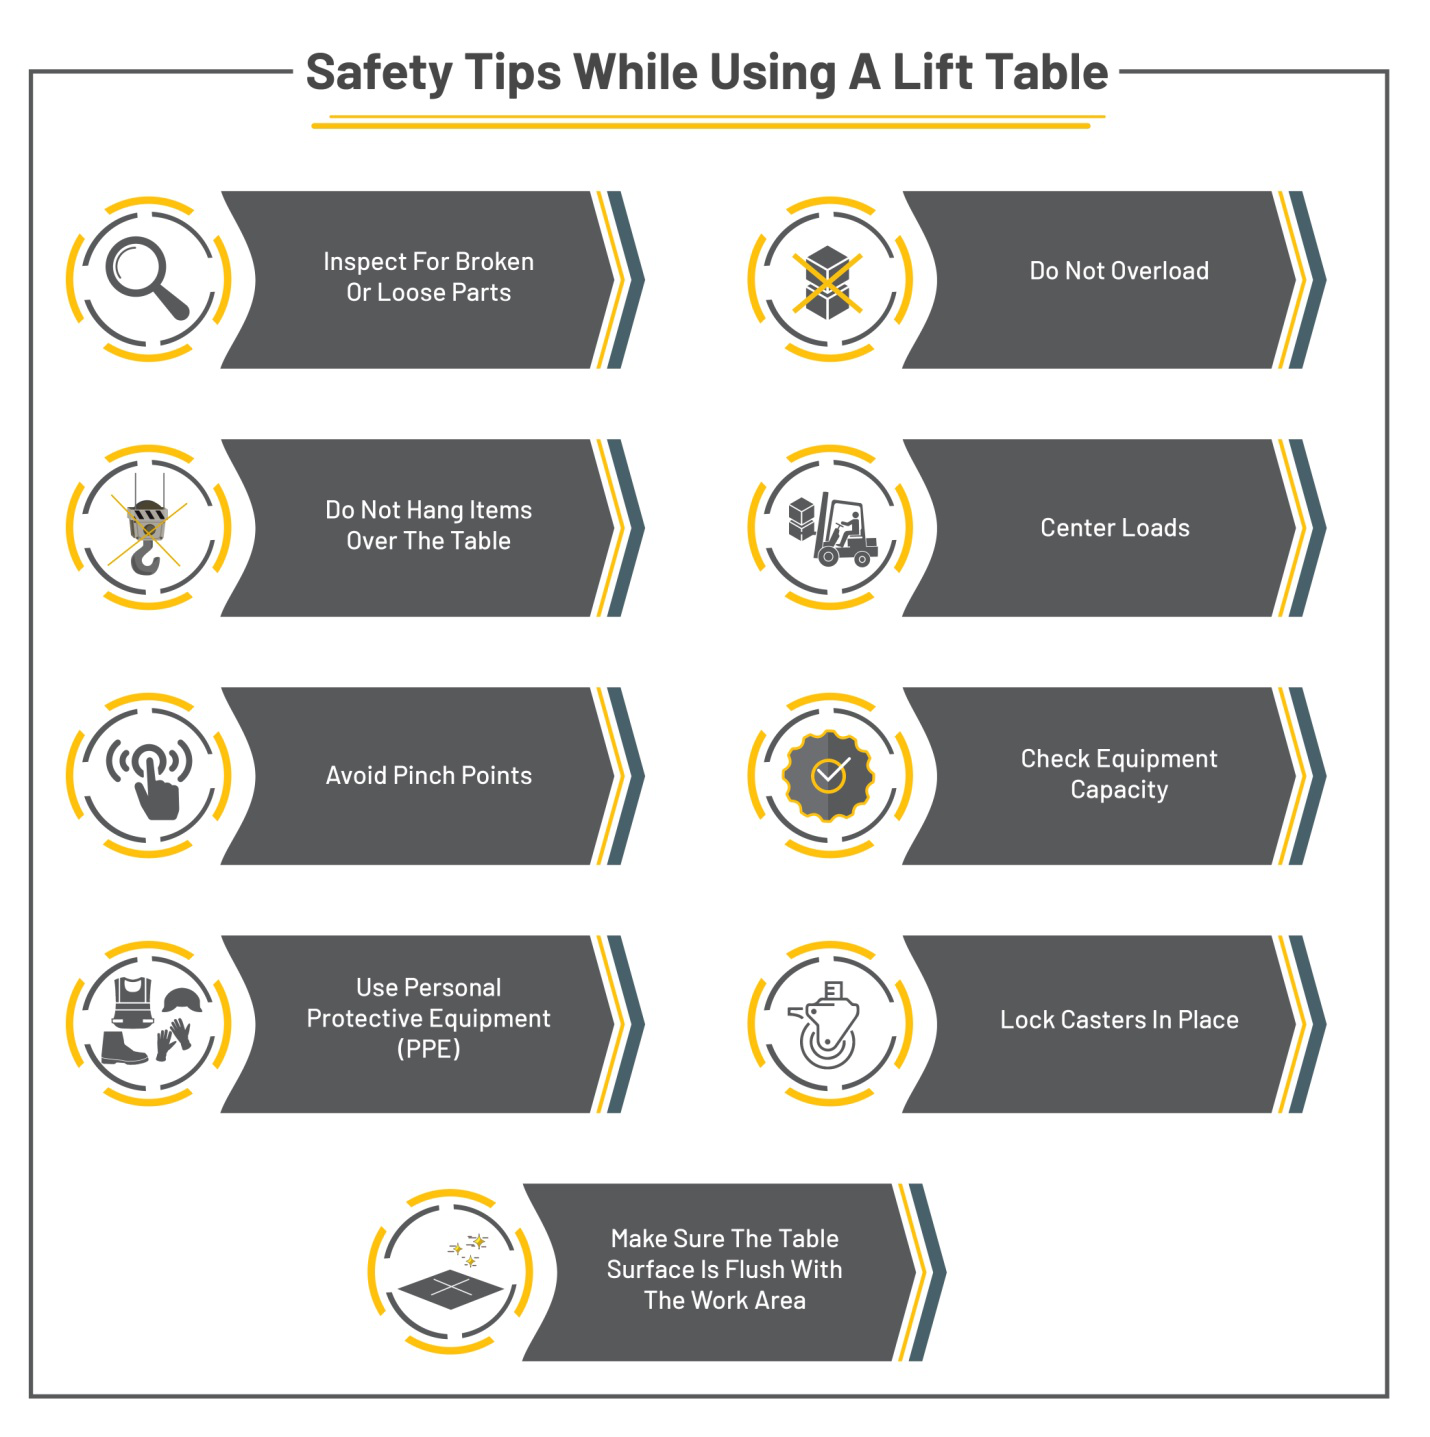 An infographic stating tips for safety while using a lift table